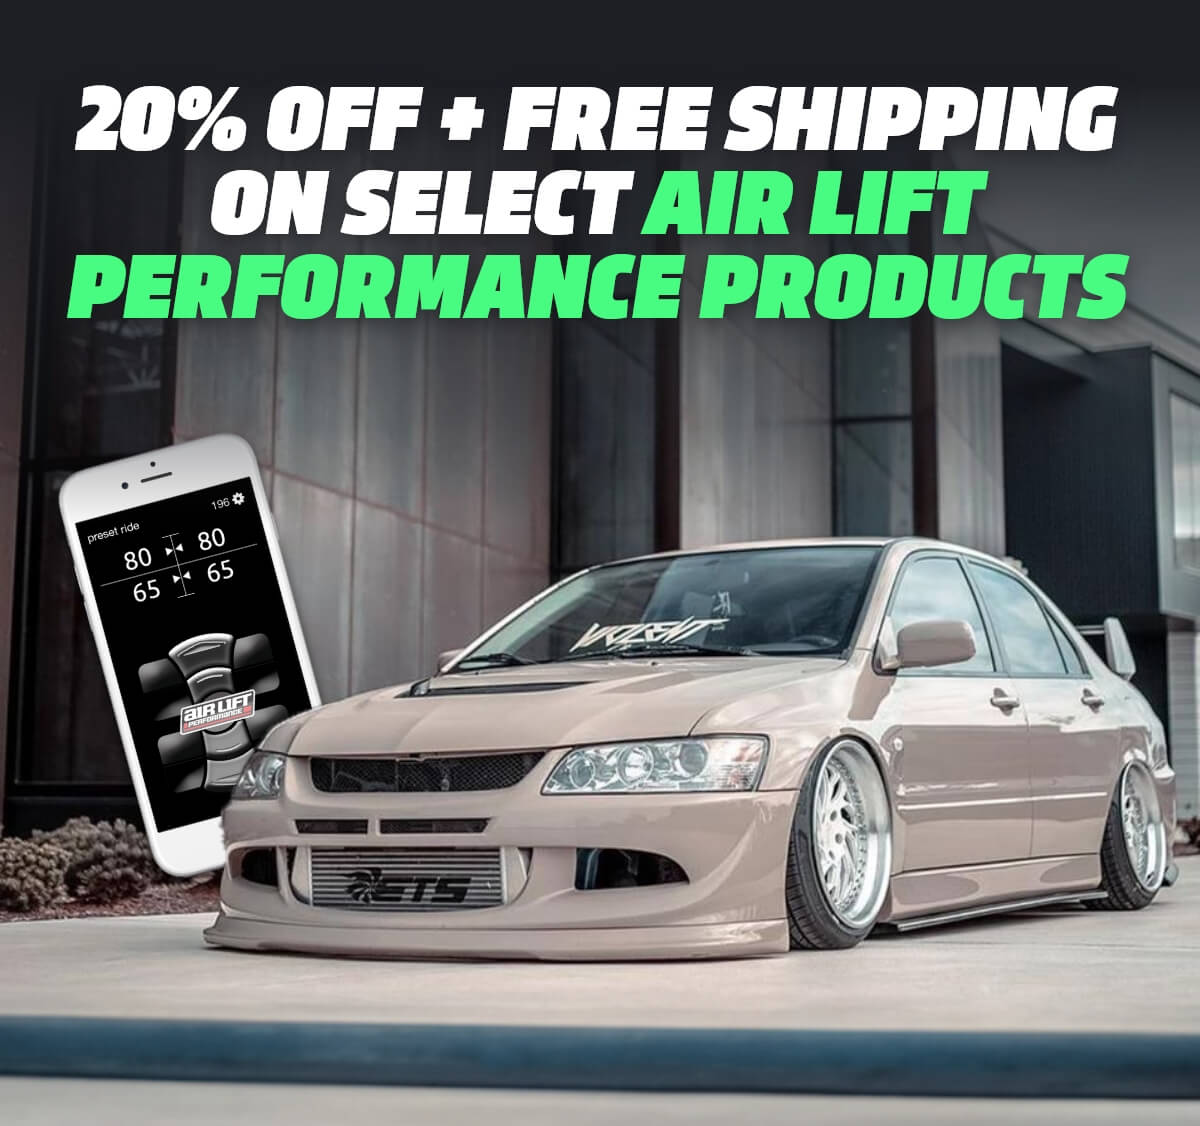 20% Off + Free Shipping on select Air Lift Performance Products